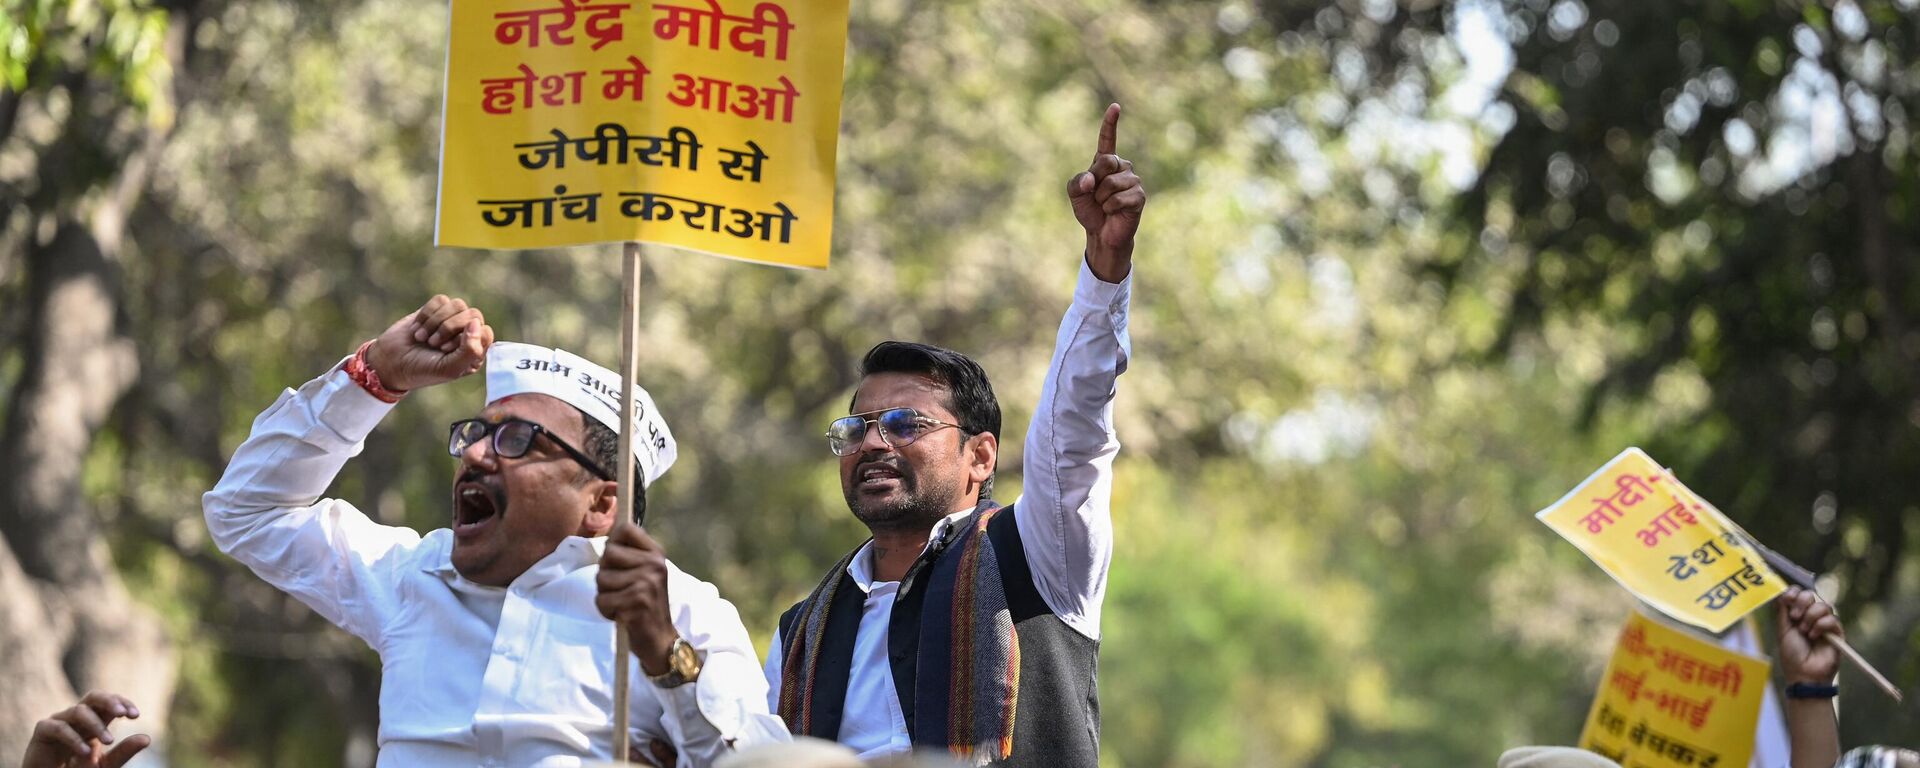 Aam Aadmi Party (AAP) activists shout slogans near the Bharatiya Janata Party (BJP) headquarters during a protest in New Delhi on February 12, 2023, calling for an enquiry into allegations of major accounting fraud at Adani, the country's biggest conglomerate. - Sputnik India, 1920, 24.02.2023